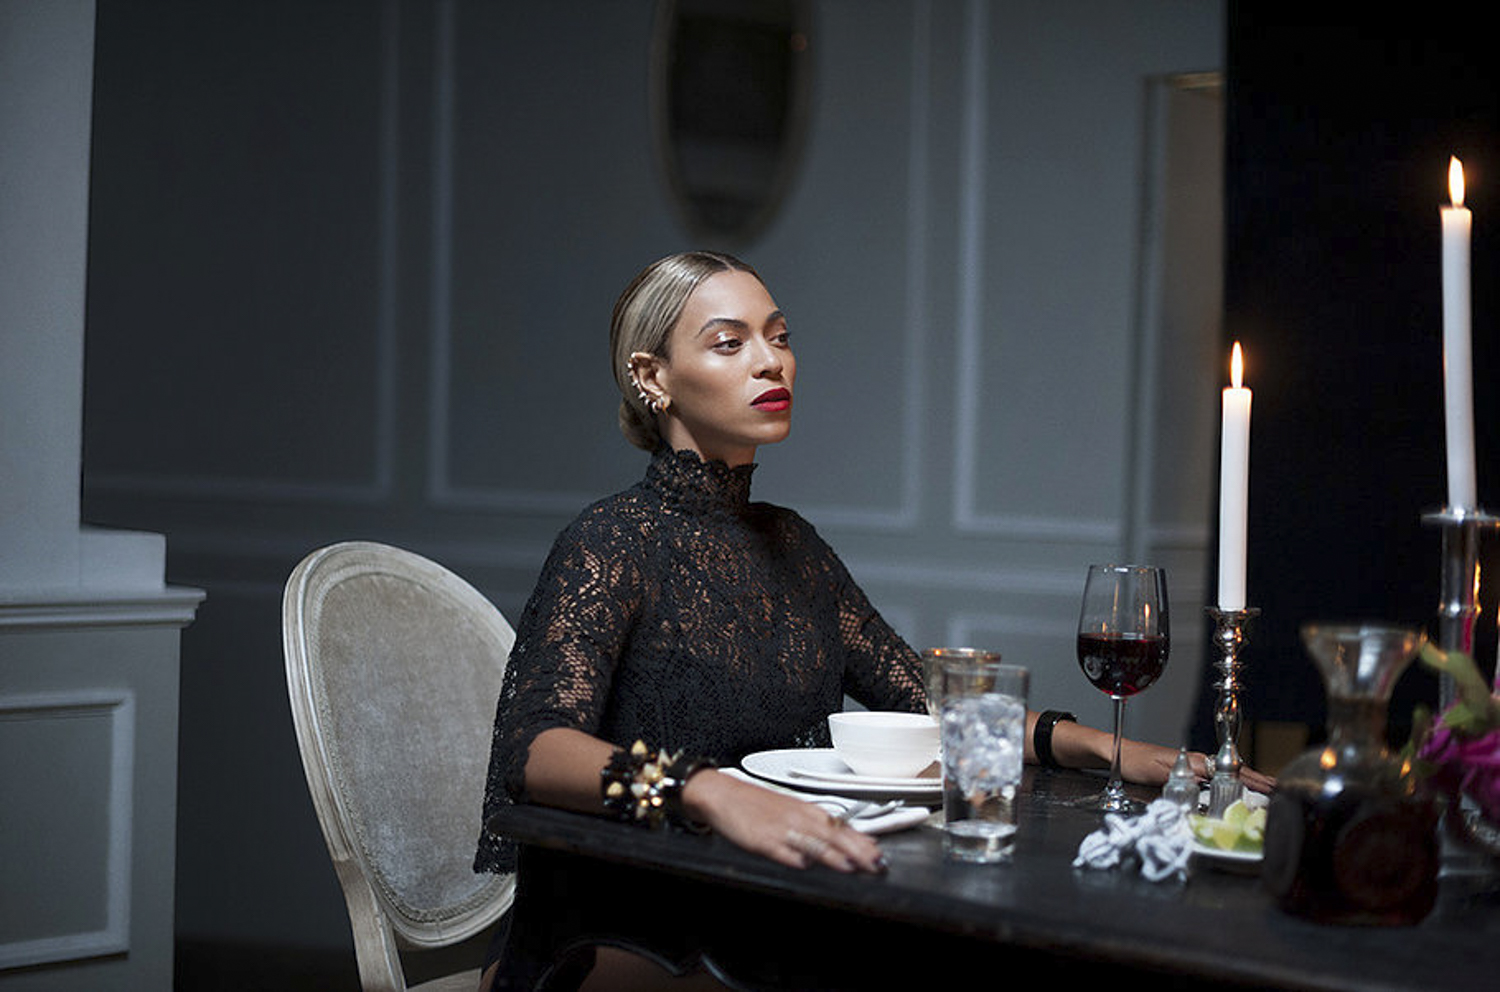 Beyonce photographed by Aviva Klein- copyright 2021